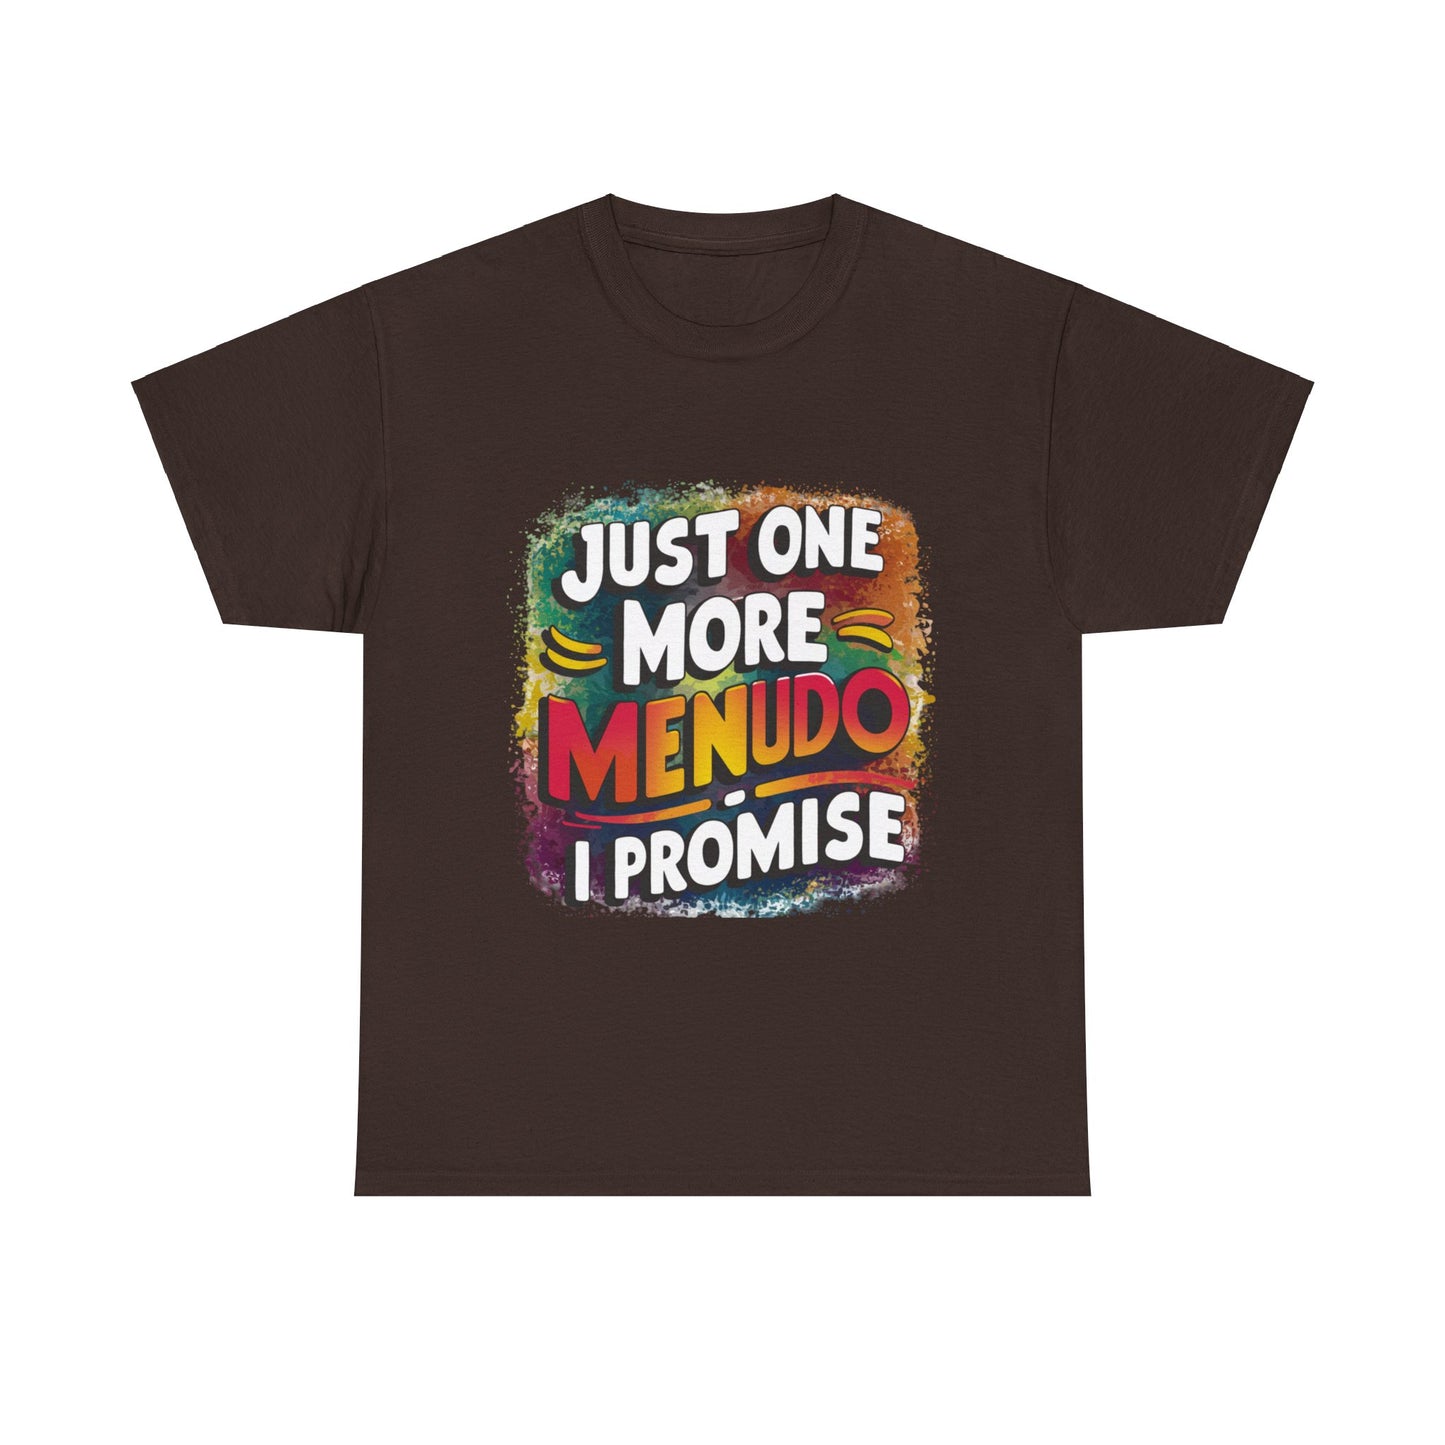 Just One More Menudo I Promise Mexican Food Graphic Unisex Heavy Cotton Tee Cotton Funny Humorous Graphic Soft Premium Unisex Men Women Dark Chocolate T-shirt Birthday Gift-3